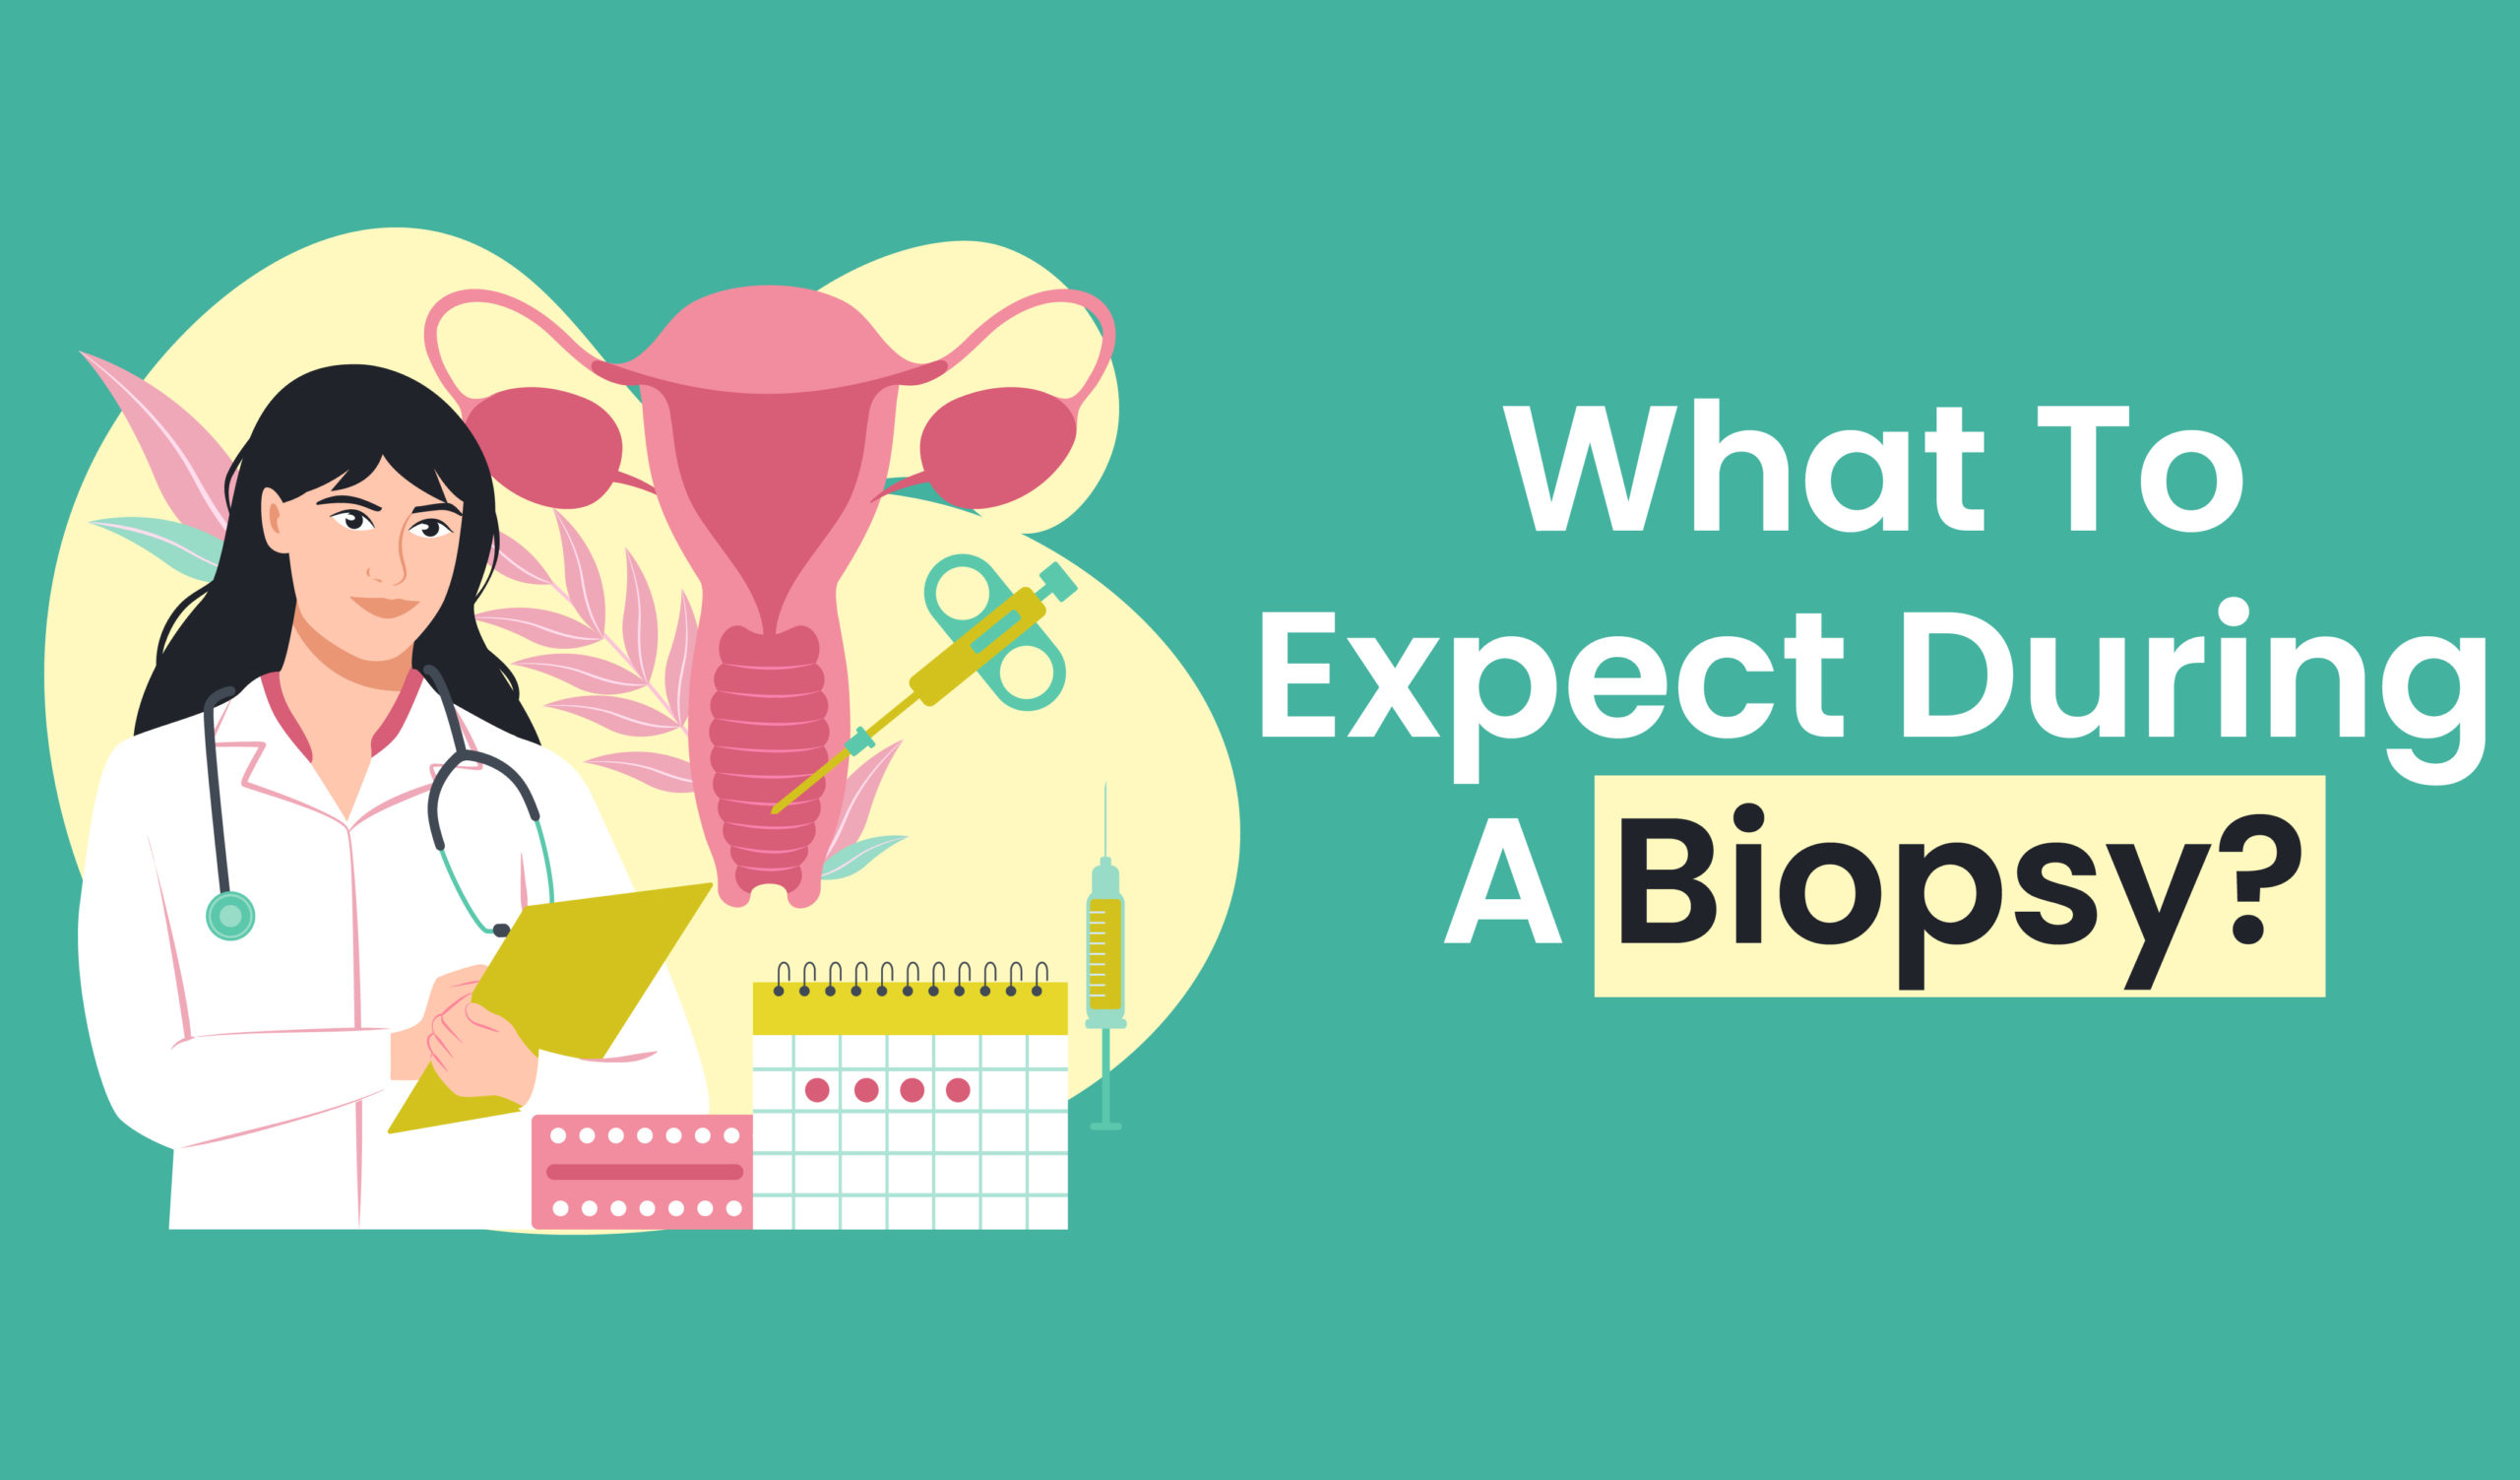 What to expect during a biopsy